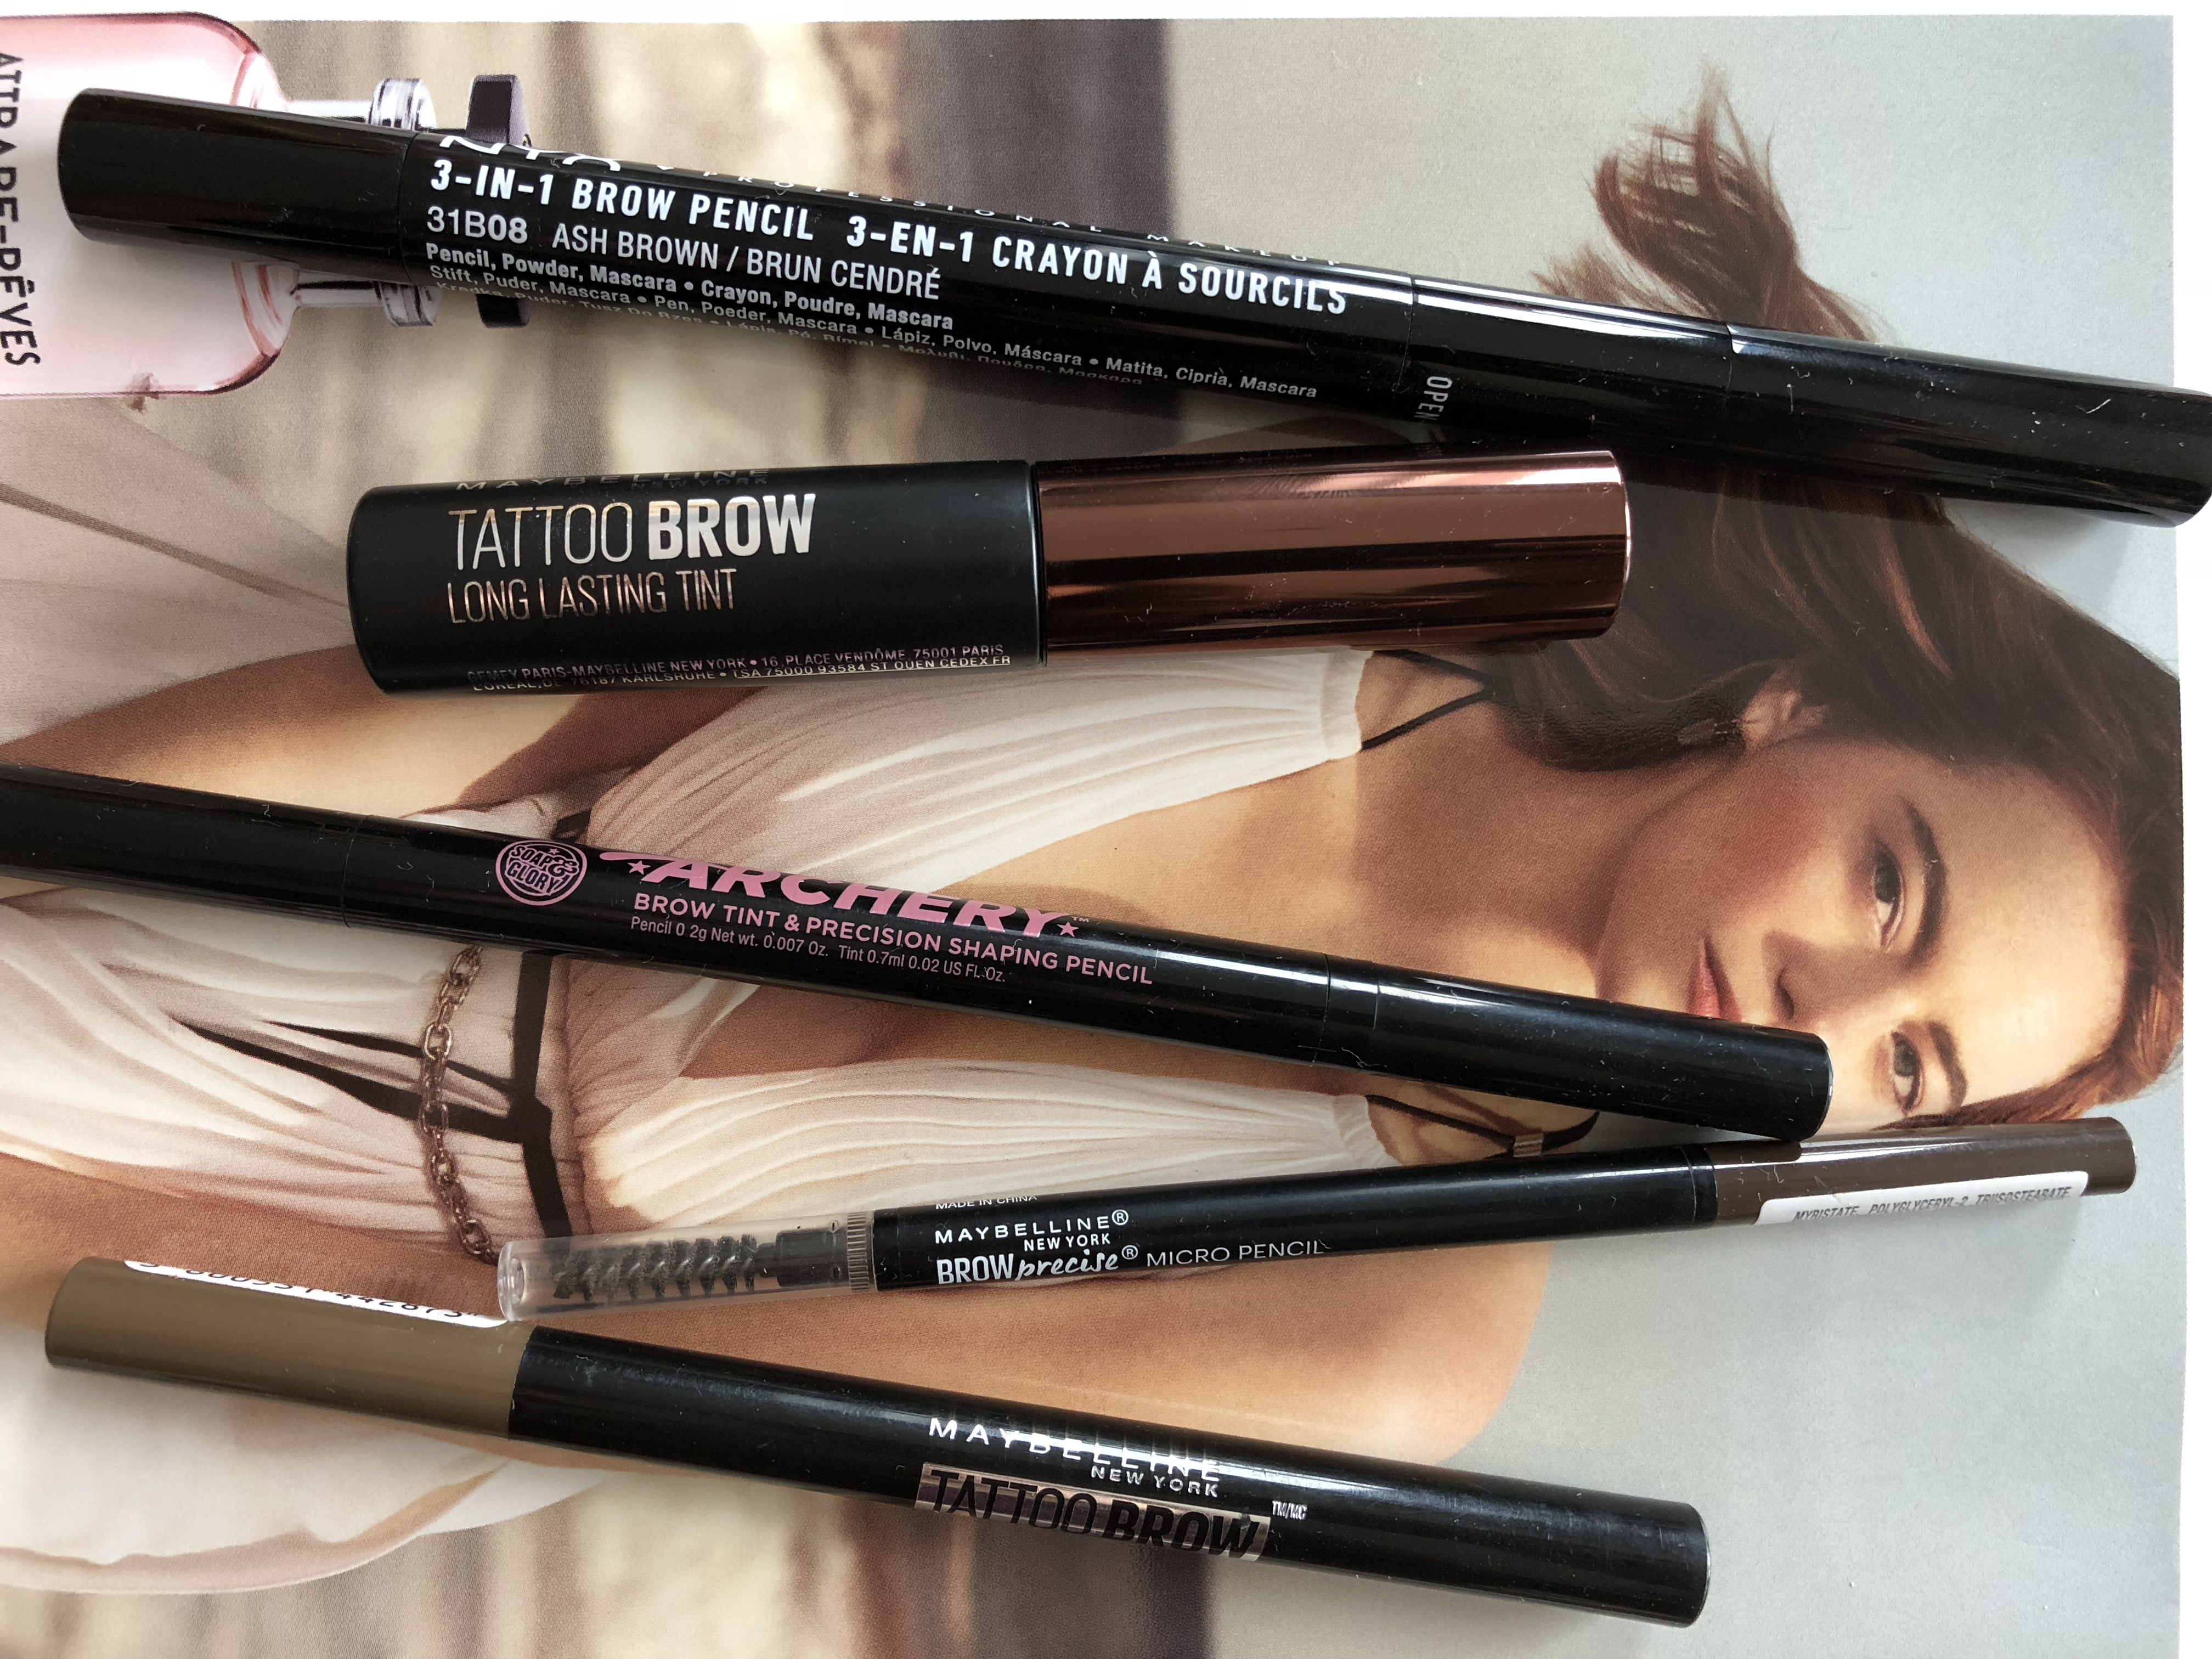 A REVIEW Makeup OF - Beauty THE AFFORDABLE, Product BROW LONG-LASTING Up - Made BEST Tutorial Face Reviews, Videos PRODUCTS & Lifestyle